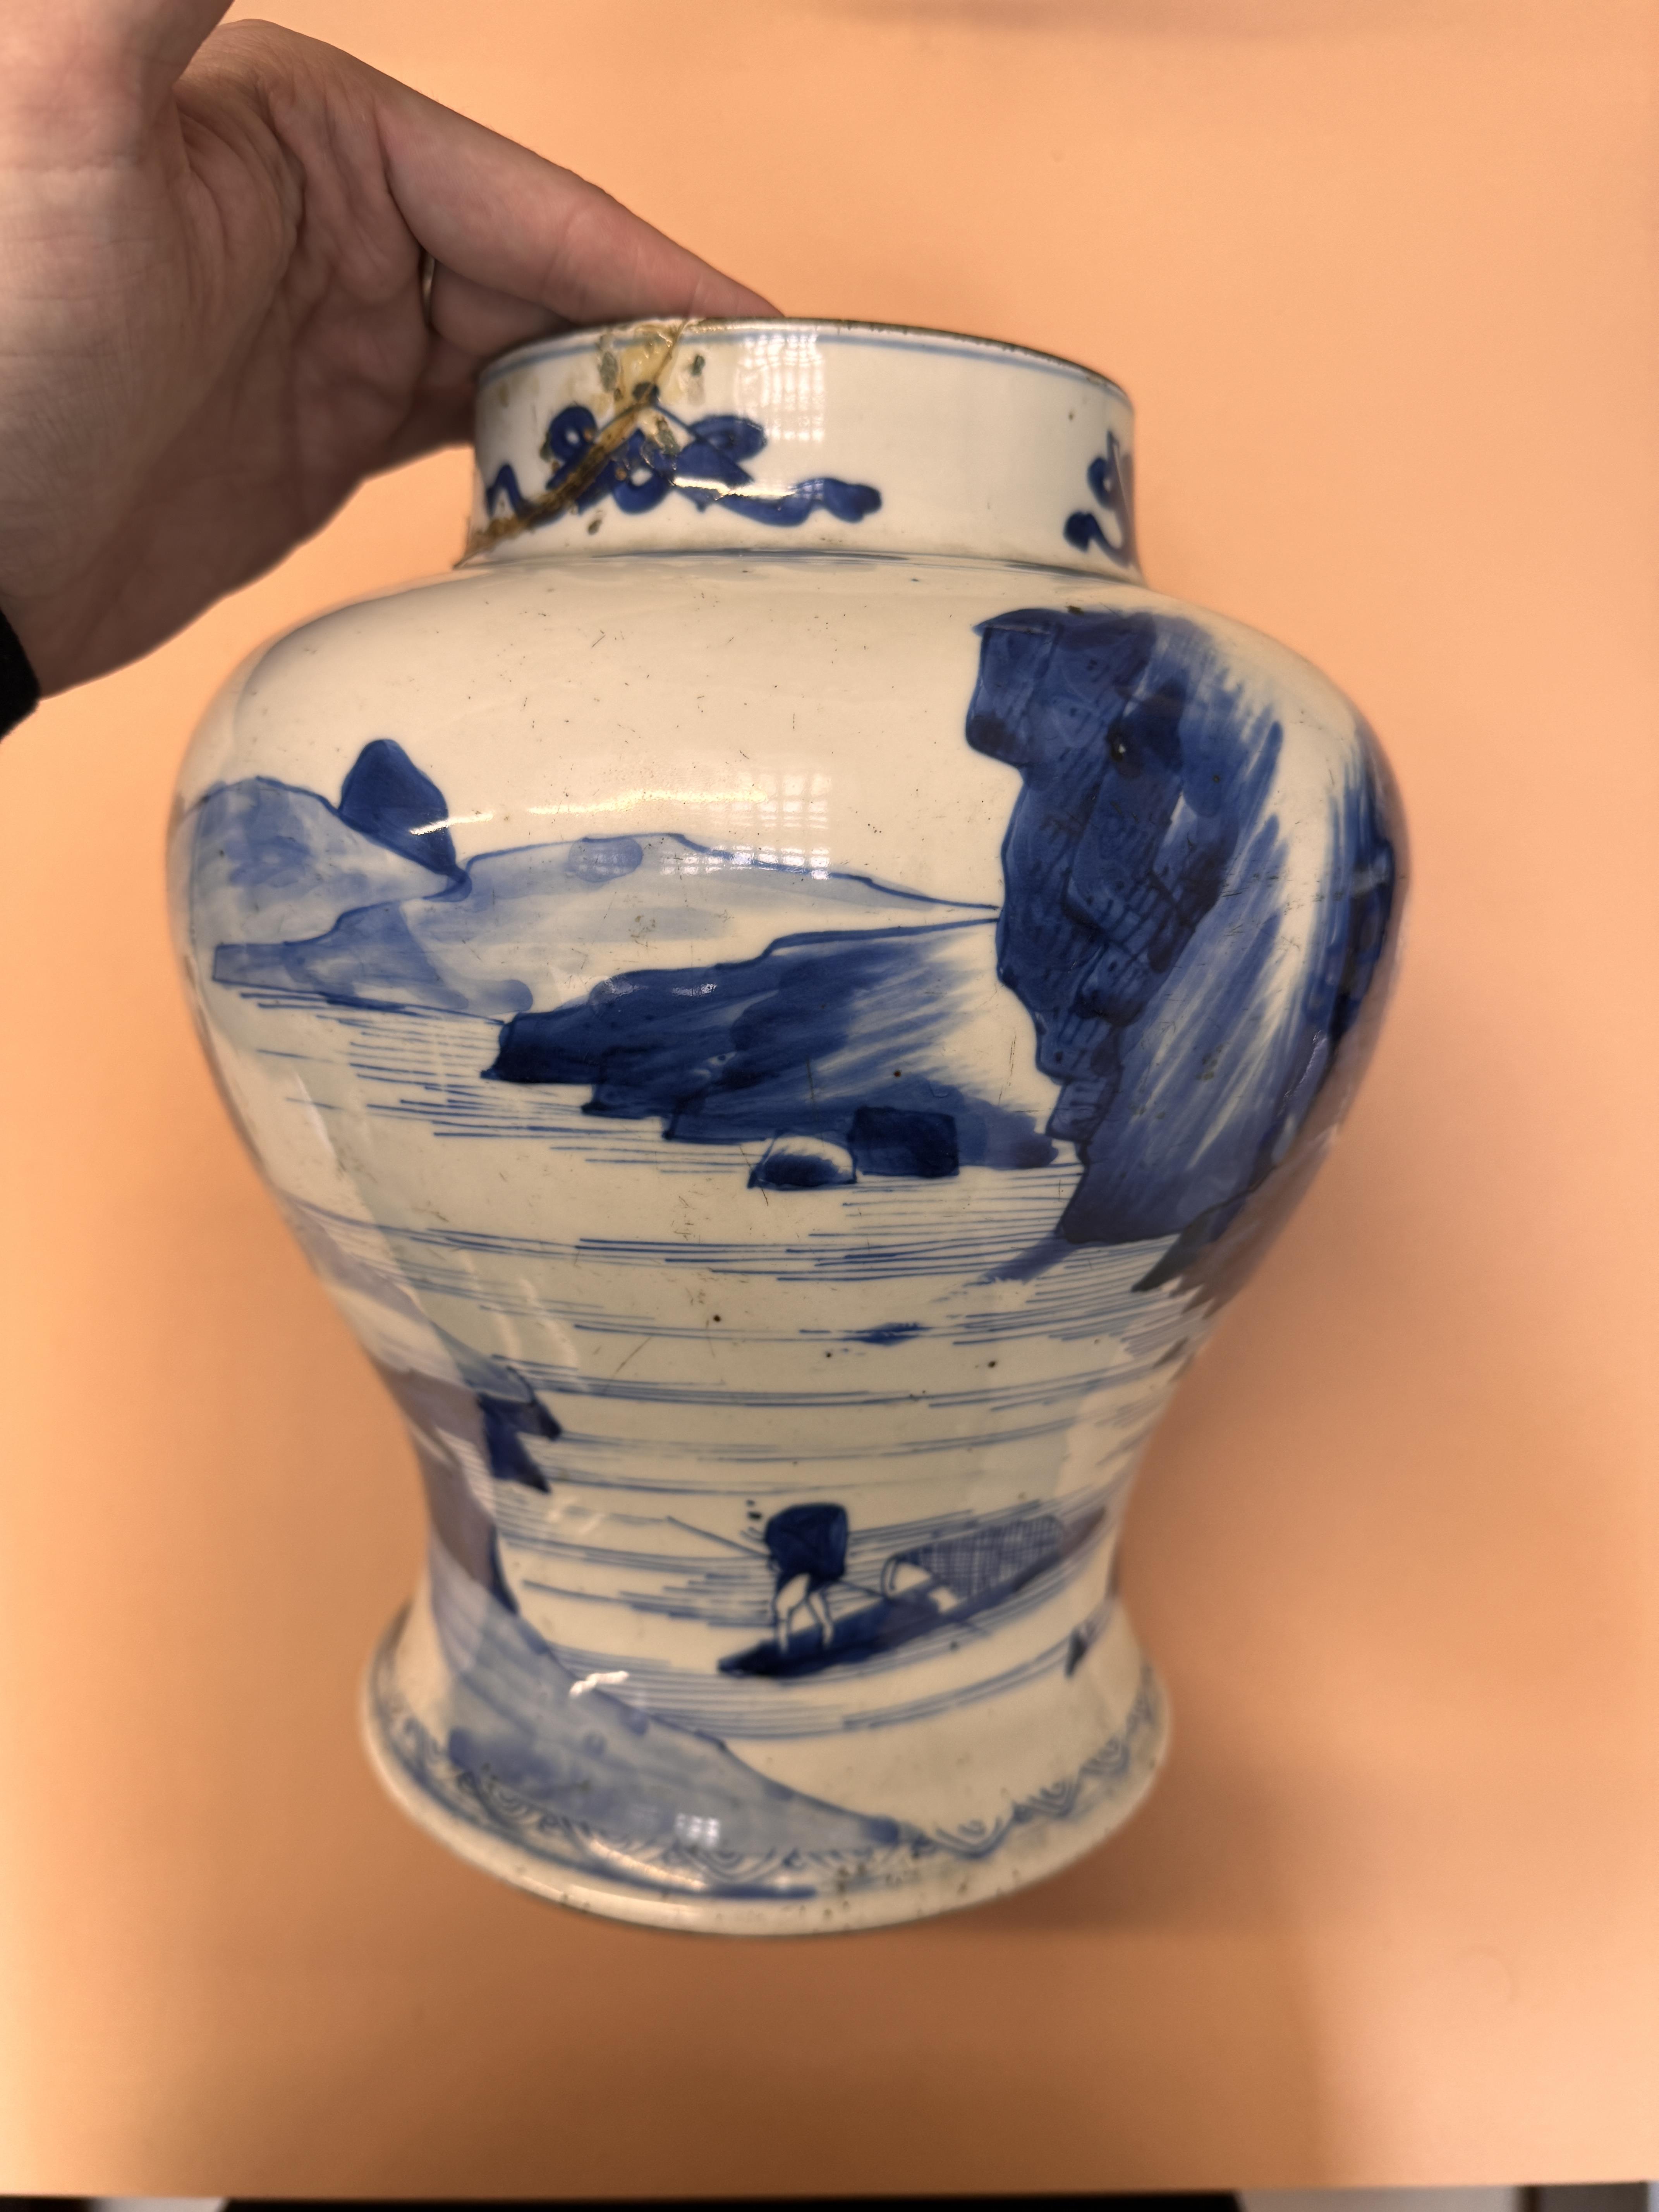 A CHINESE BLUE AND WHITE 'LANDSCAPE' VASE 清康熙 青花山水圖紋瓶 - Image 13 of 22